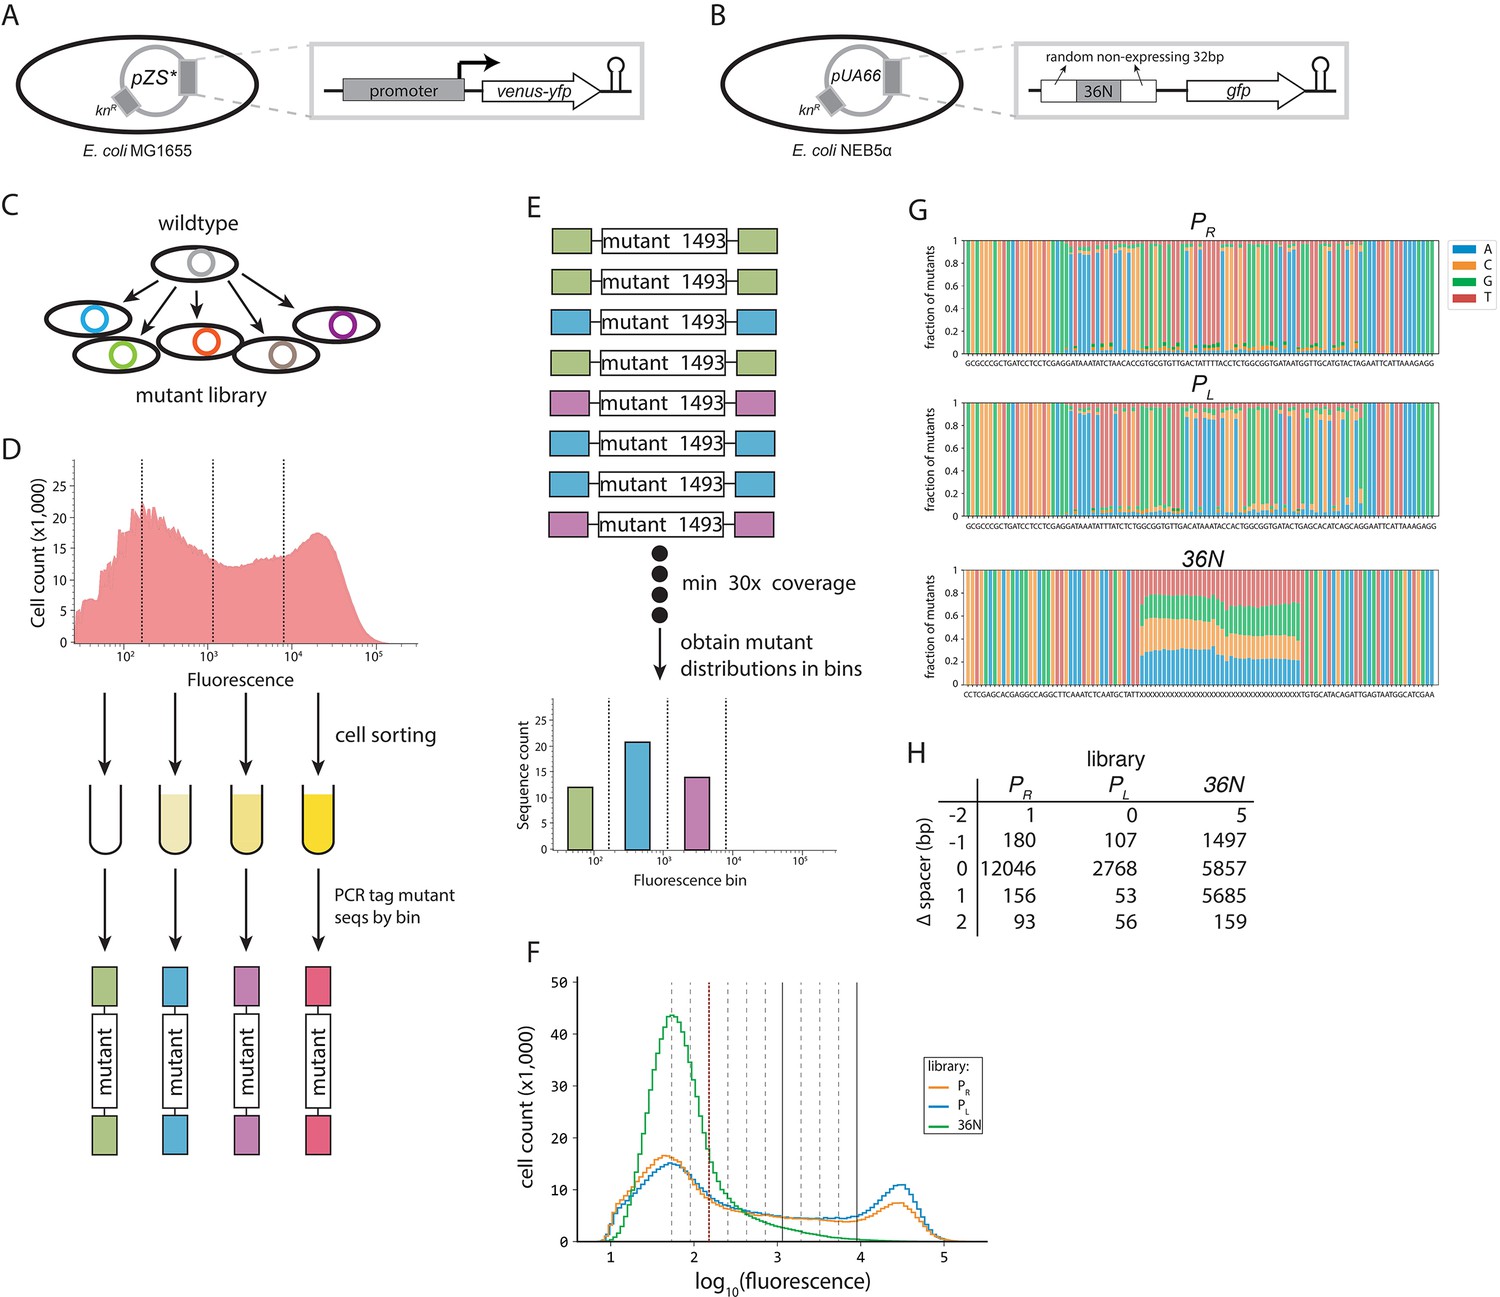 Predicting bacterial promoter function and evolution from random sequences  | eLife